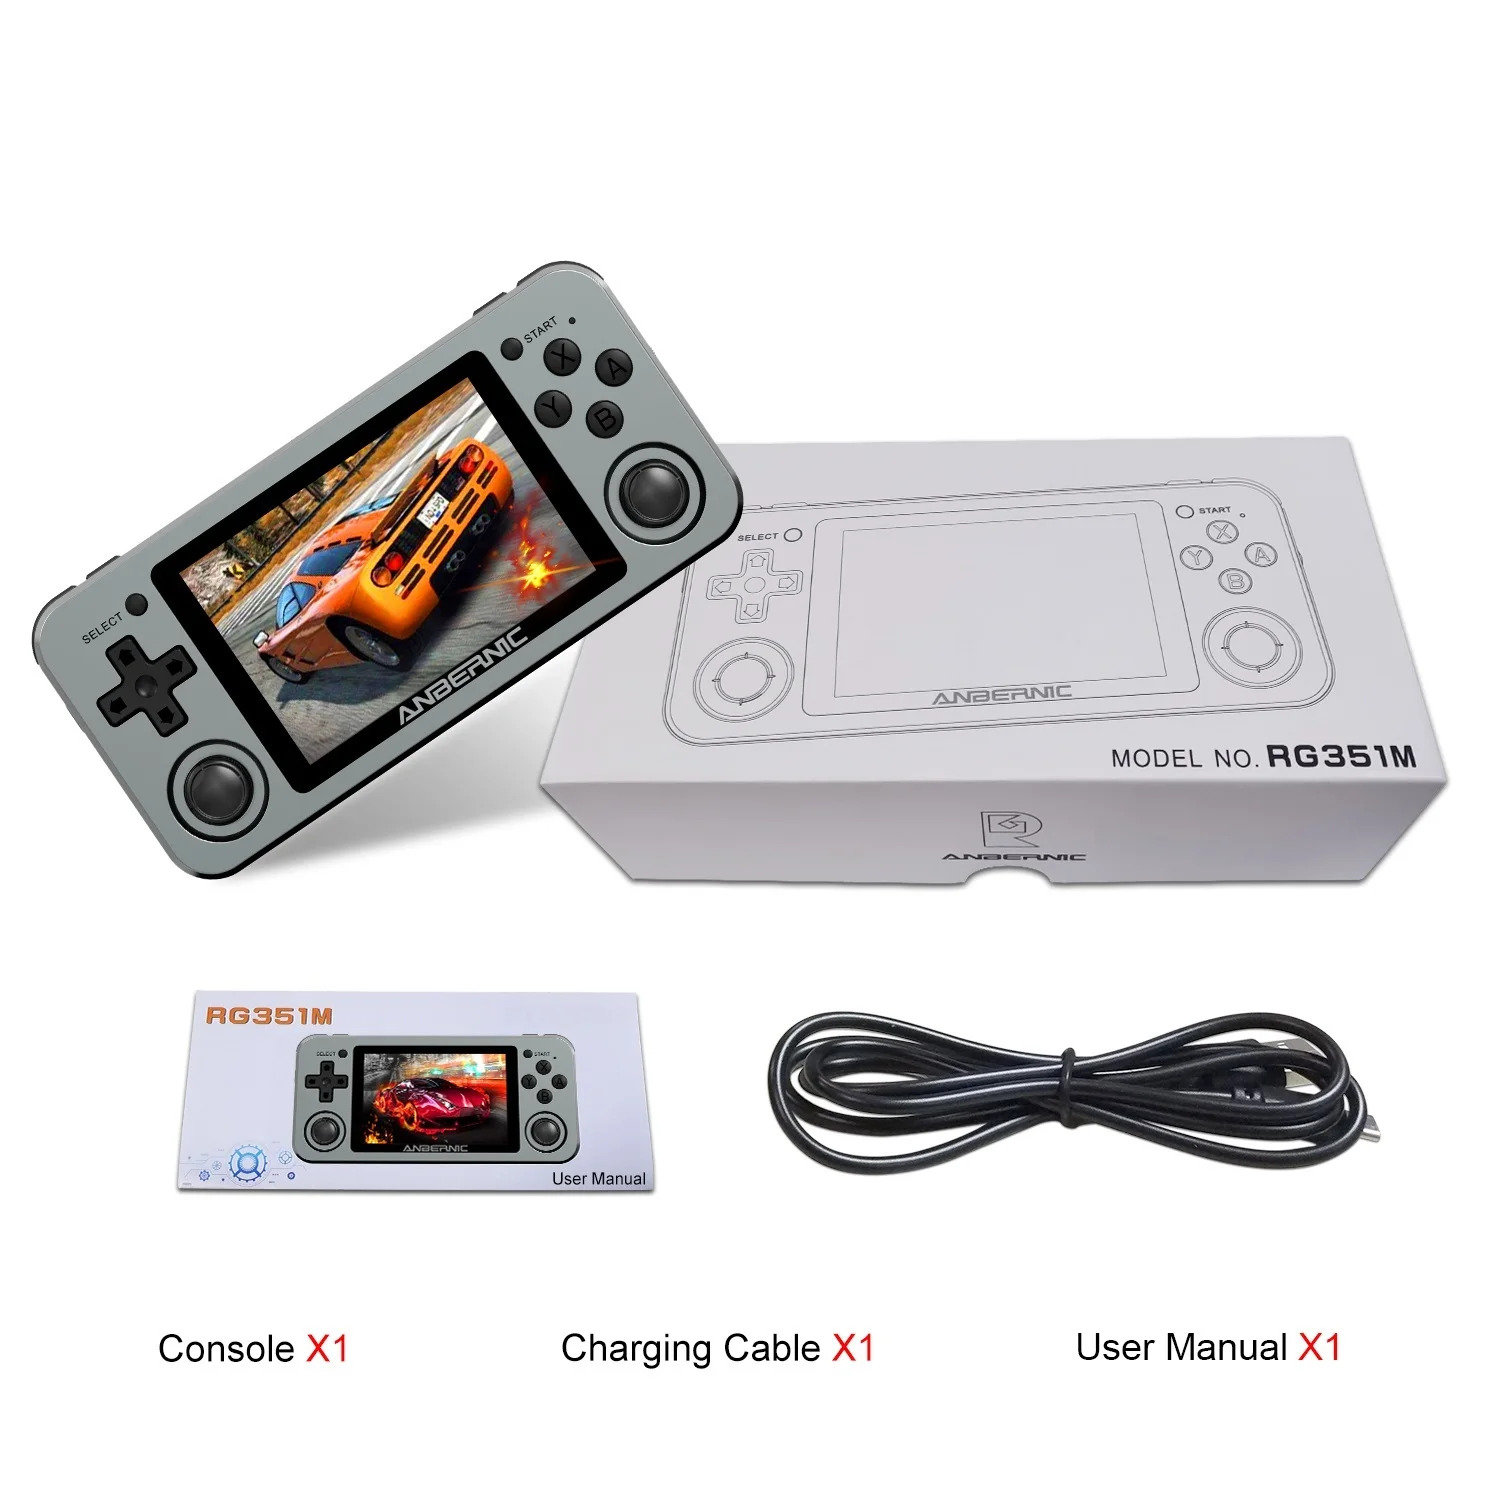 

NEW ANBERNIC RG351M RG351P Retro Video Game Console Aluminum Alloy Shell 2500 Game Portable Console RG351 Handheld Game Player